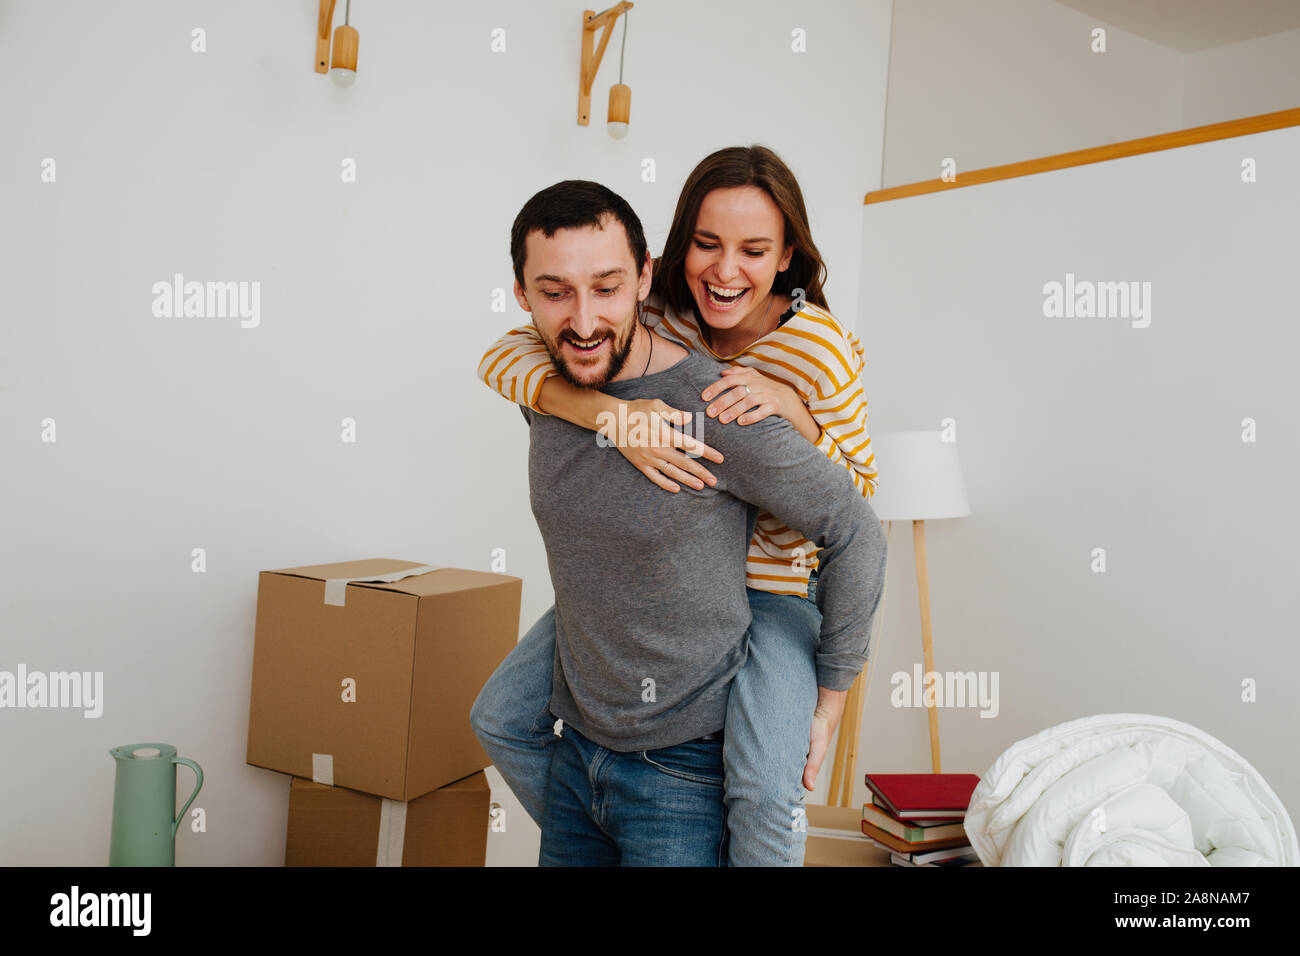 Couple celebrating moving into a new apartment. Woman riding on her man's back. Stock Photo